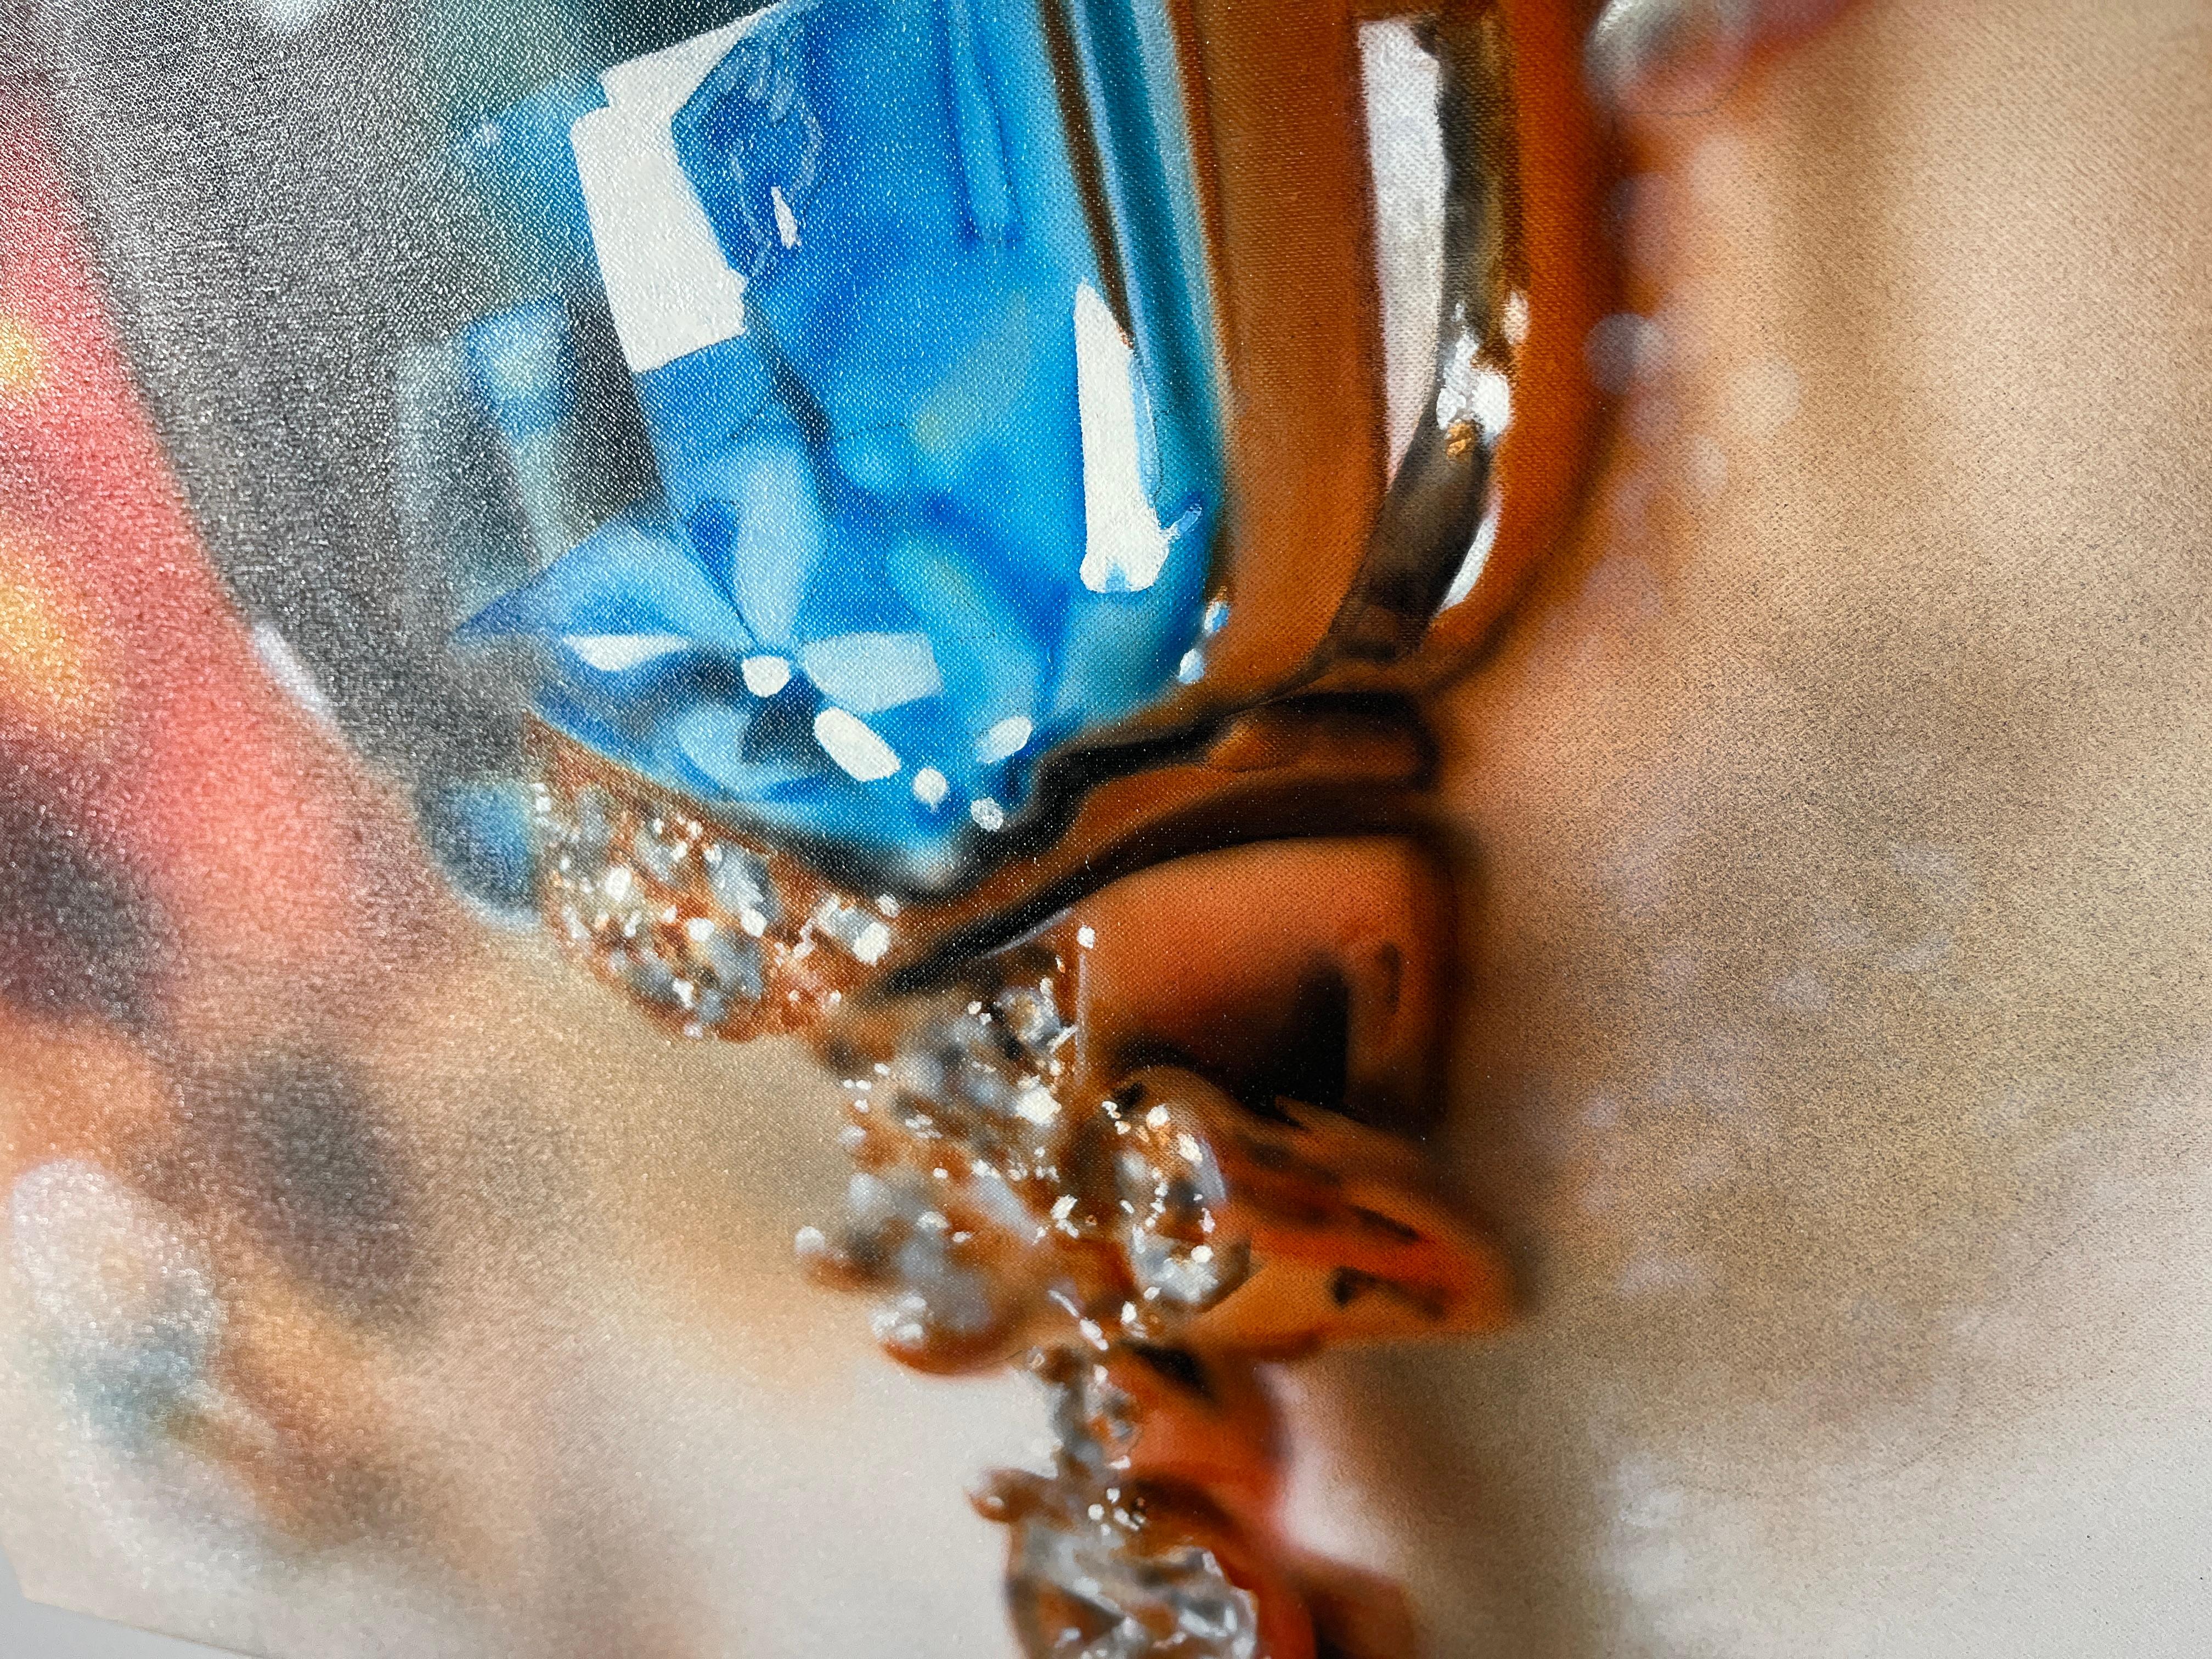 Acrylic & oil on canvas
21 x 38

In this painting, a Bulgari piece of jewelry takes center stage. The artist skillfully creates a composition where part of the jewelry is rendered in hyper-realistic detail, while the rest fades into the background,